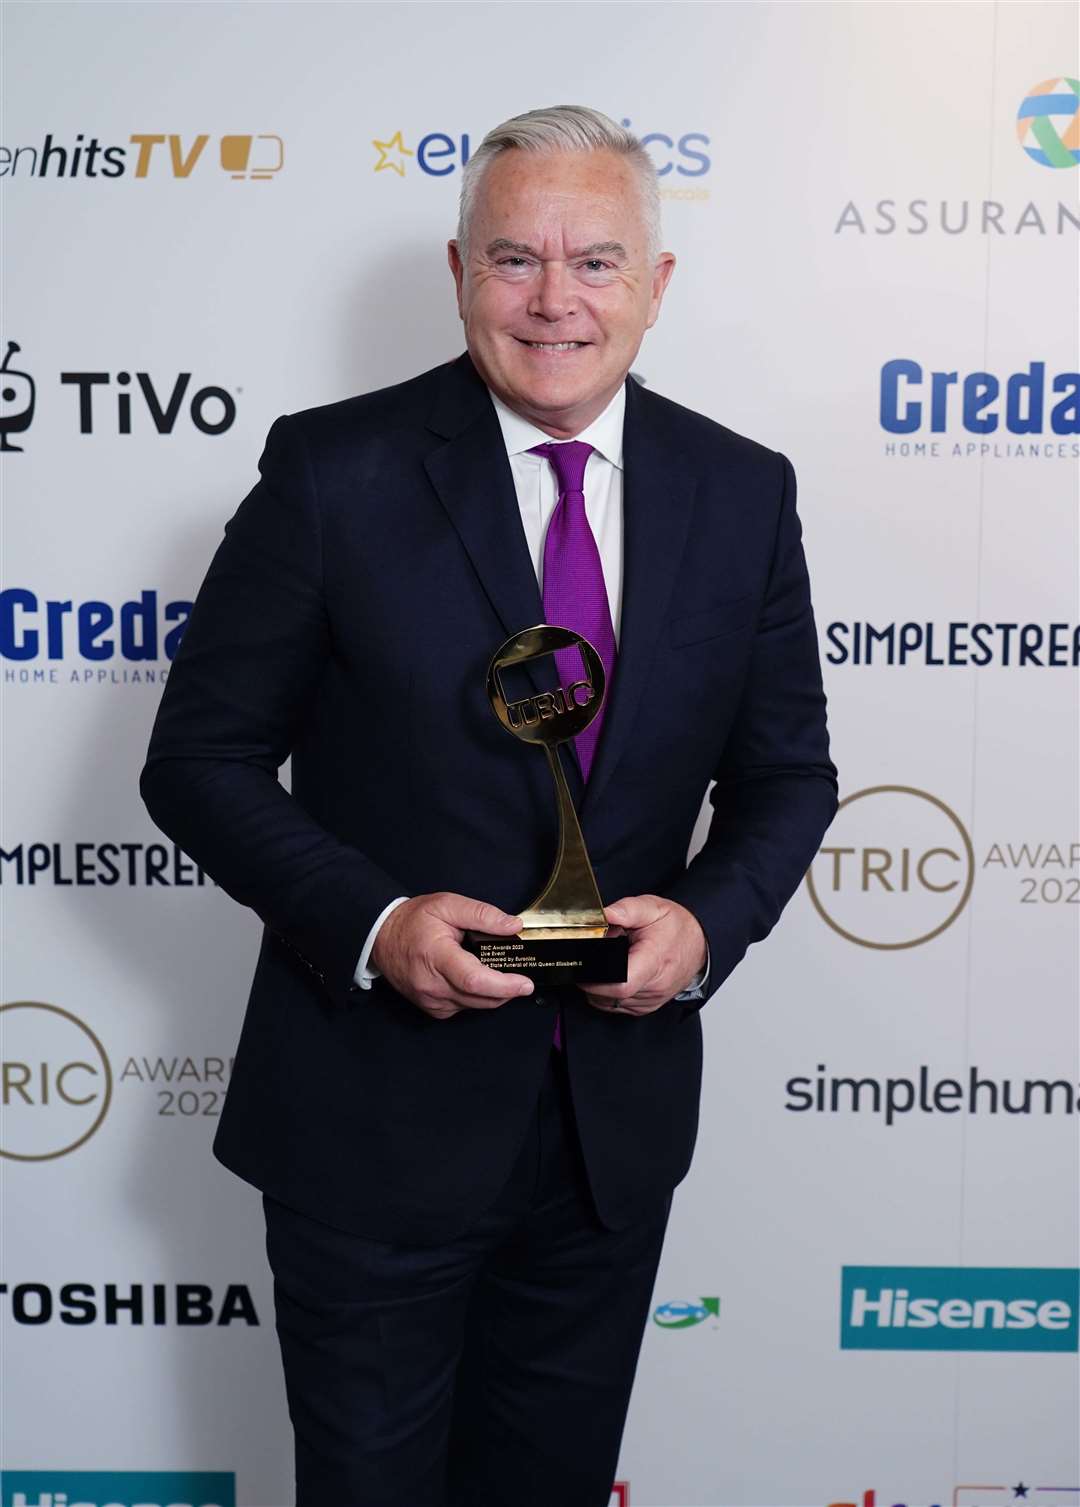 Huw Edwards with the Live Event award for the State Funeral of the late Queen at the Tric awards at the Grosvenor House Hotel earlier this year (Ian West/PA)